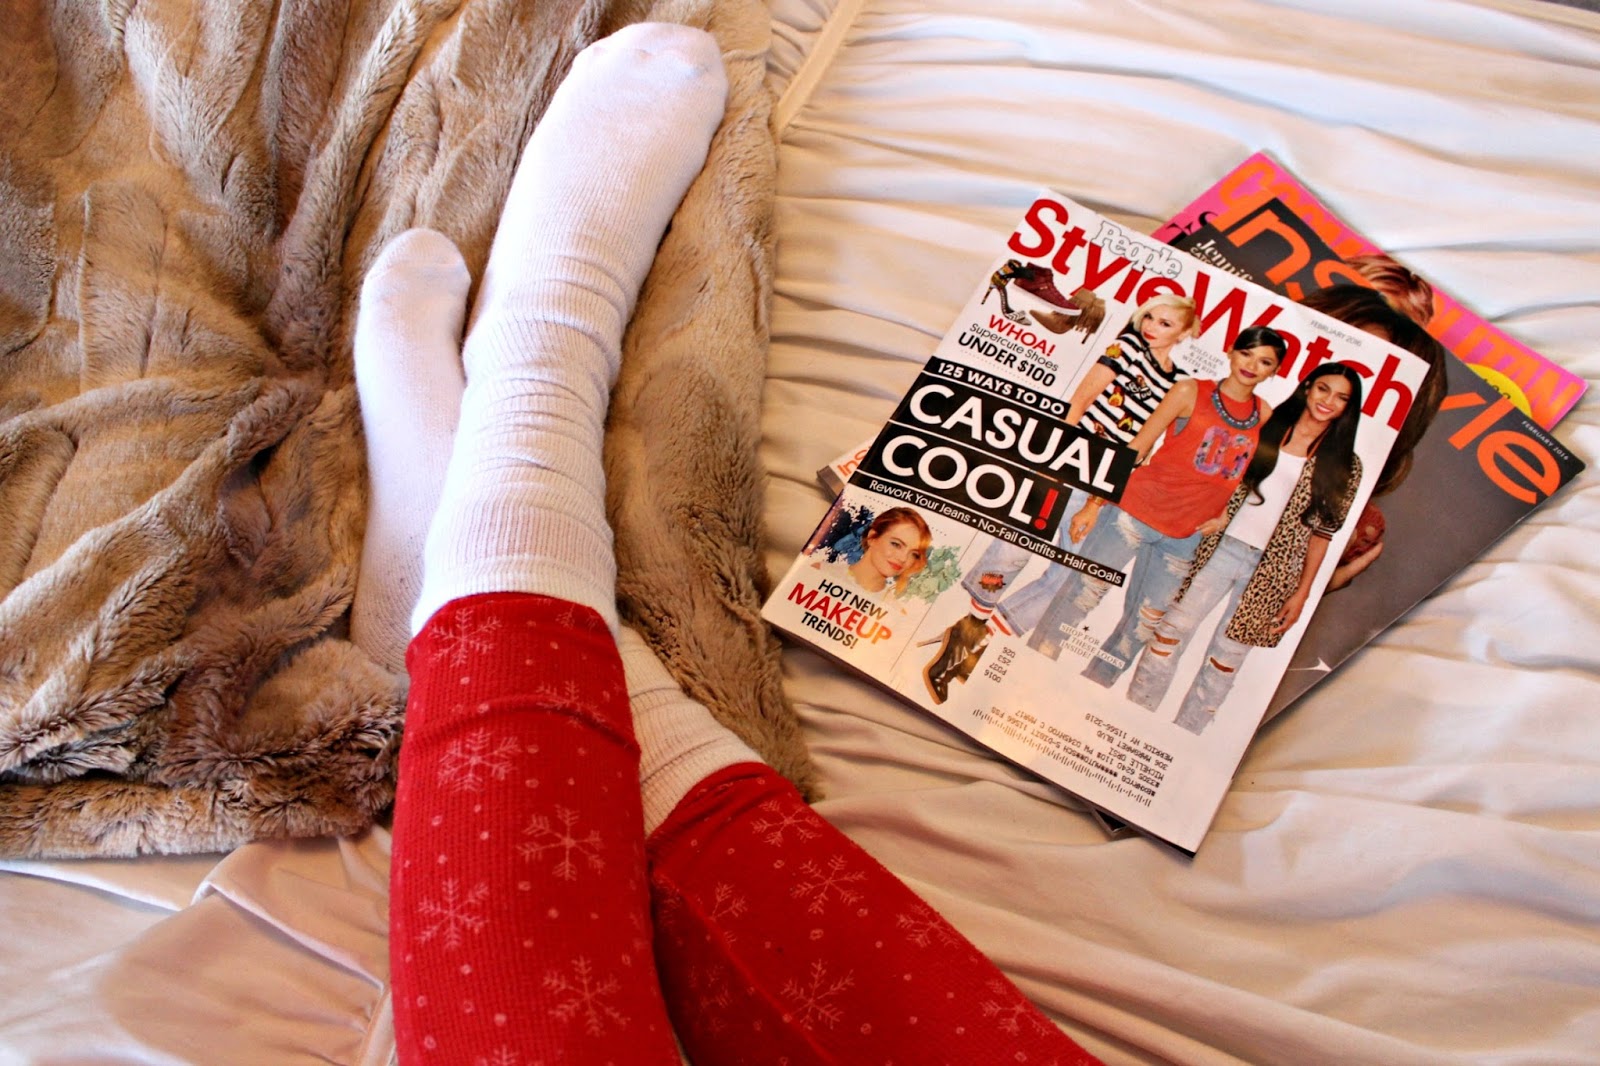 A girl lying on a bed, reading magazines. She's wearing white socks and red pajamas with a snowflake pattern, resting on top of the sheets.